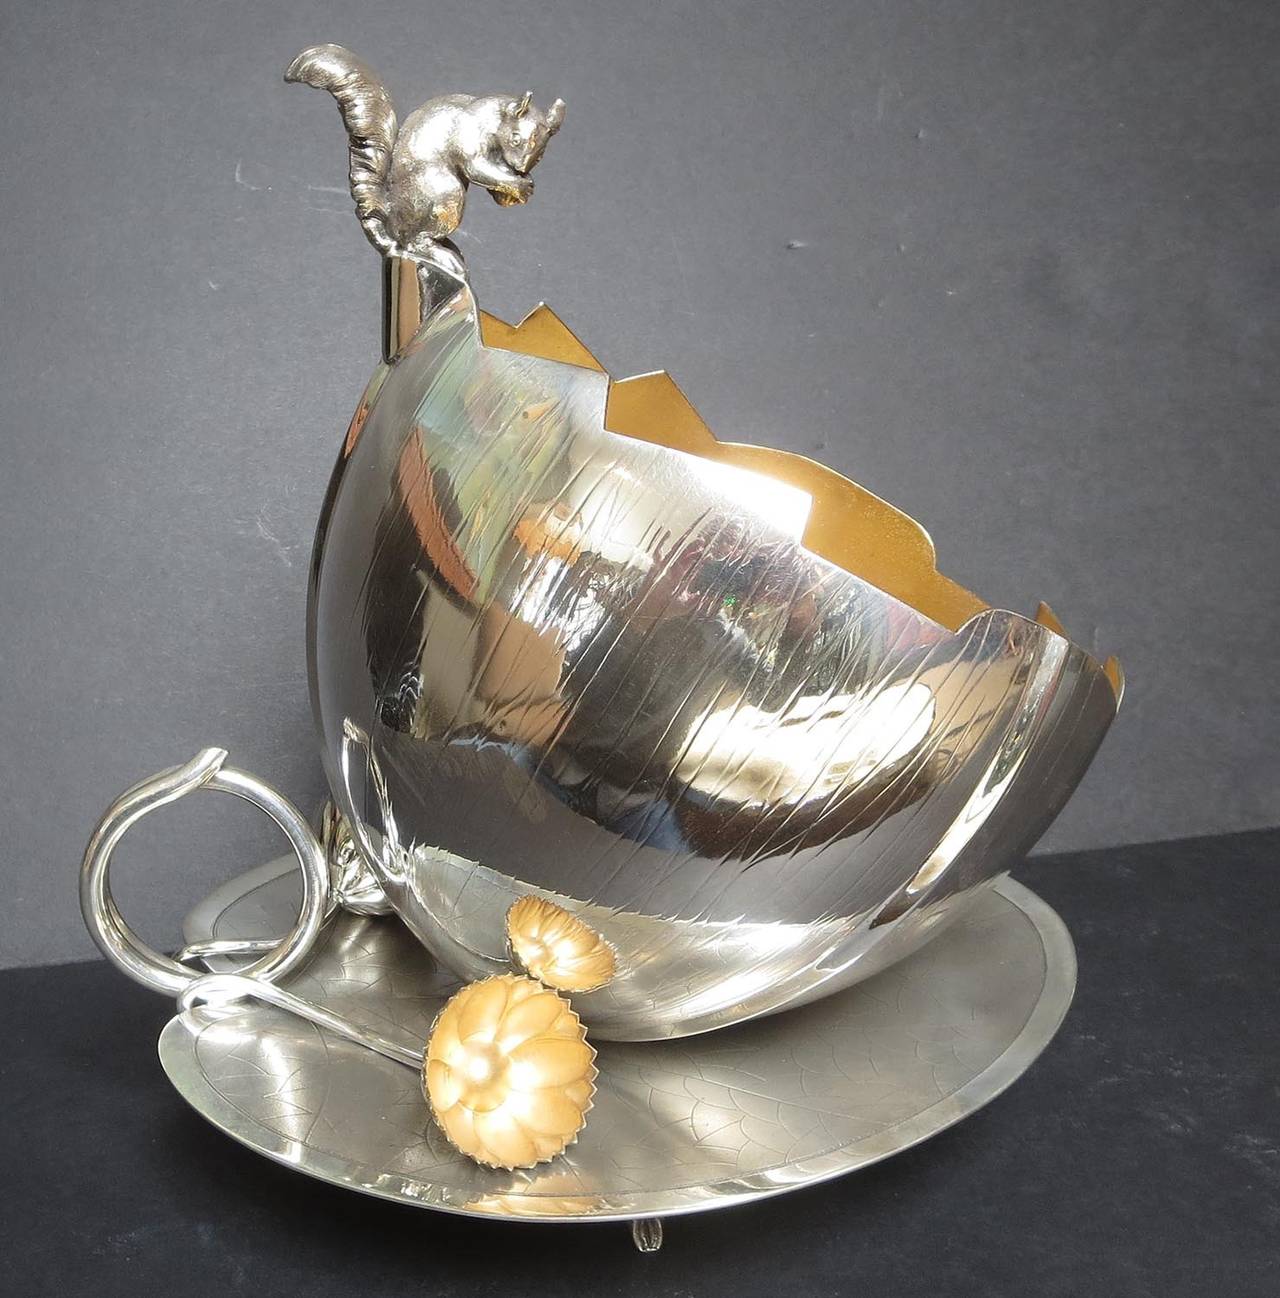 This lovely bowl depicts a small squirrel perched atop  a cracked acorn shell. The shell vessel sits atop a veined lily pad base, with a sensual pair of flowers decorating the edges. The silver plate is in remarkable condition, and the condition is